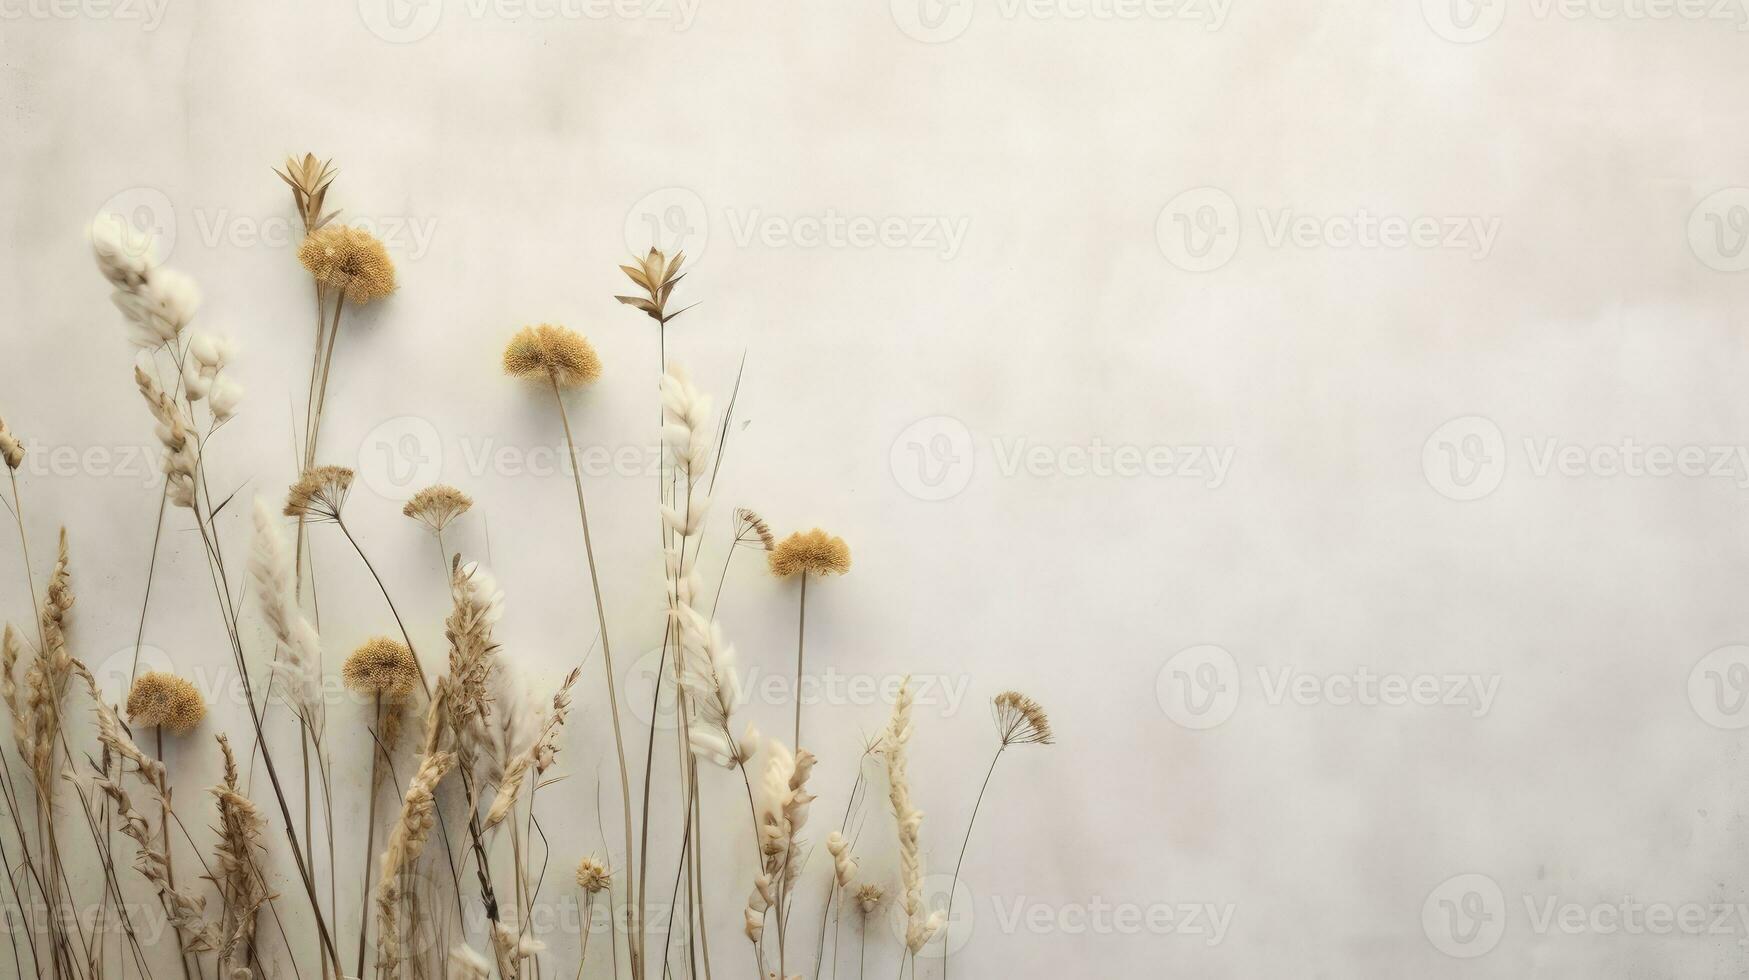 Flat lay of dried field flowers with shadow projected on a grey textured background isolated Minimal handmade eco nature concept for bloggers. silhouette concept photo